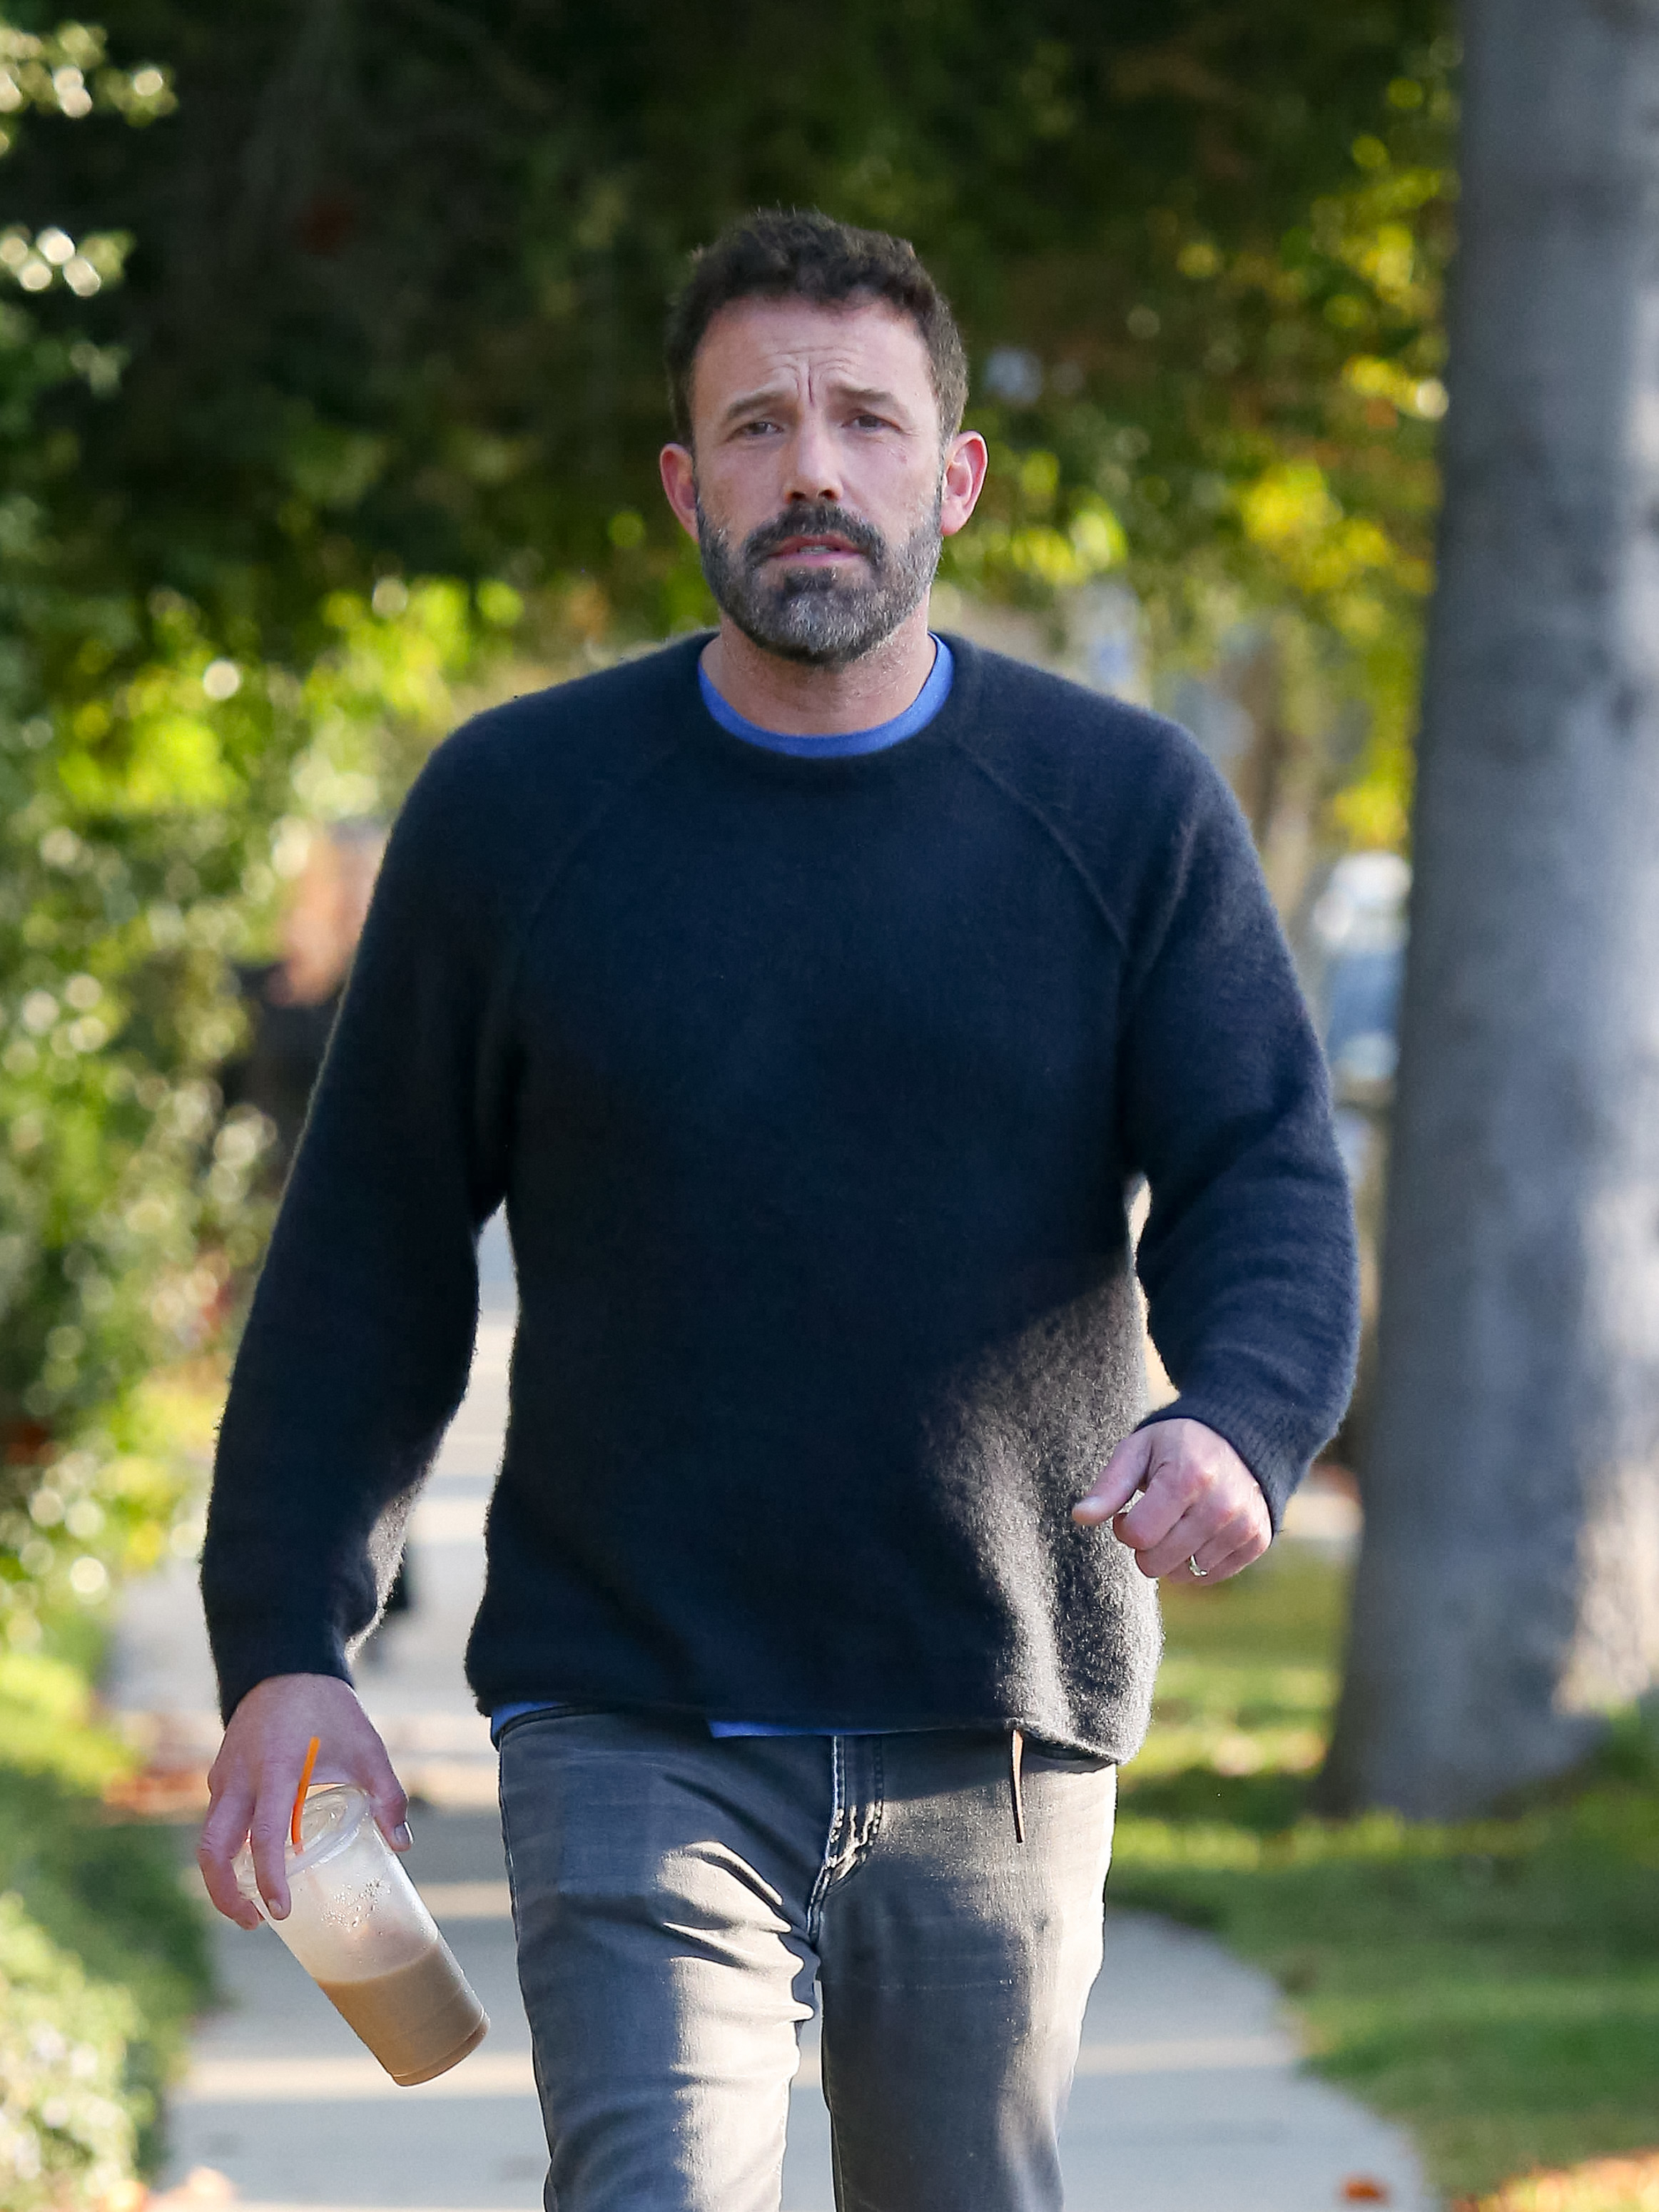 Close-up of Ben walking on a path in a sweater and jeans and wearing a takeout iced coffee